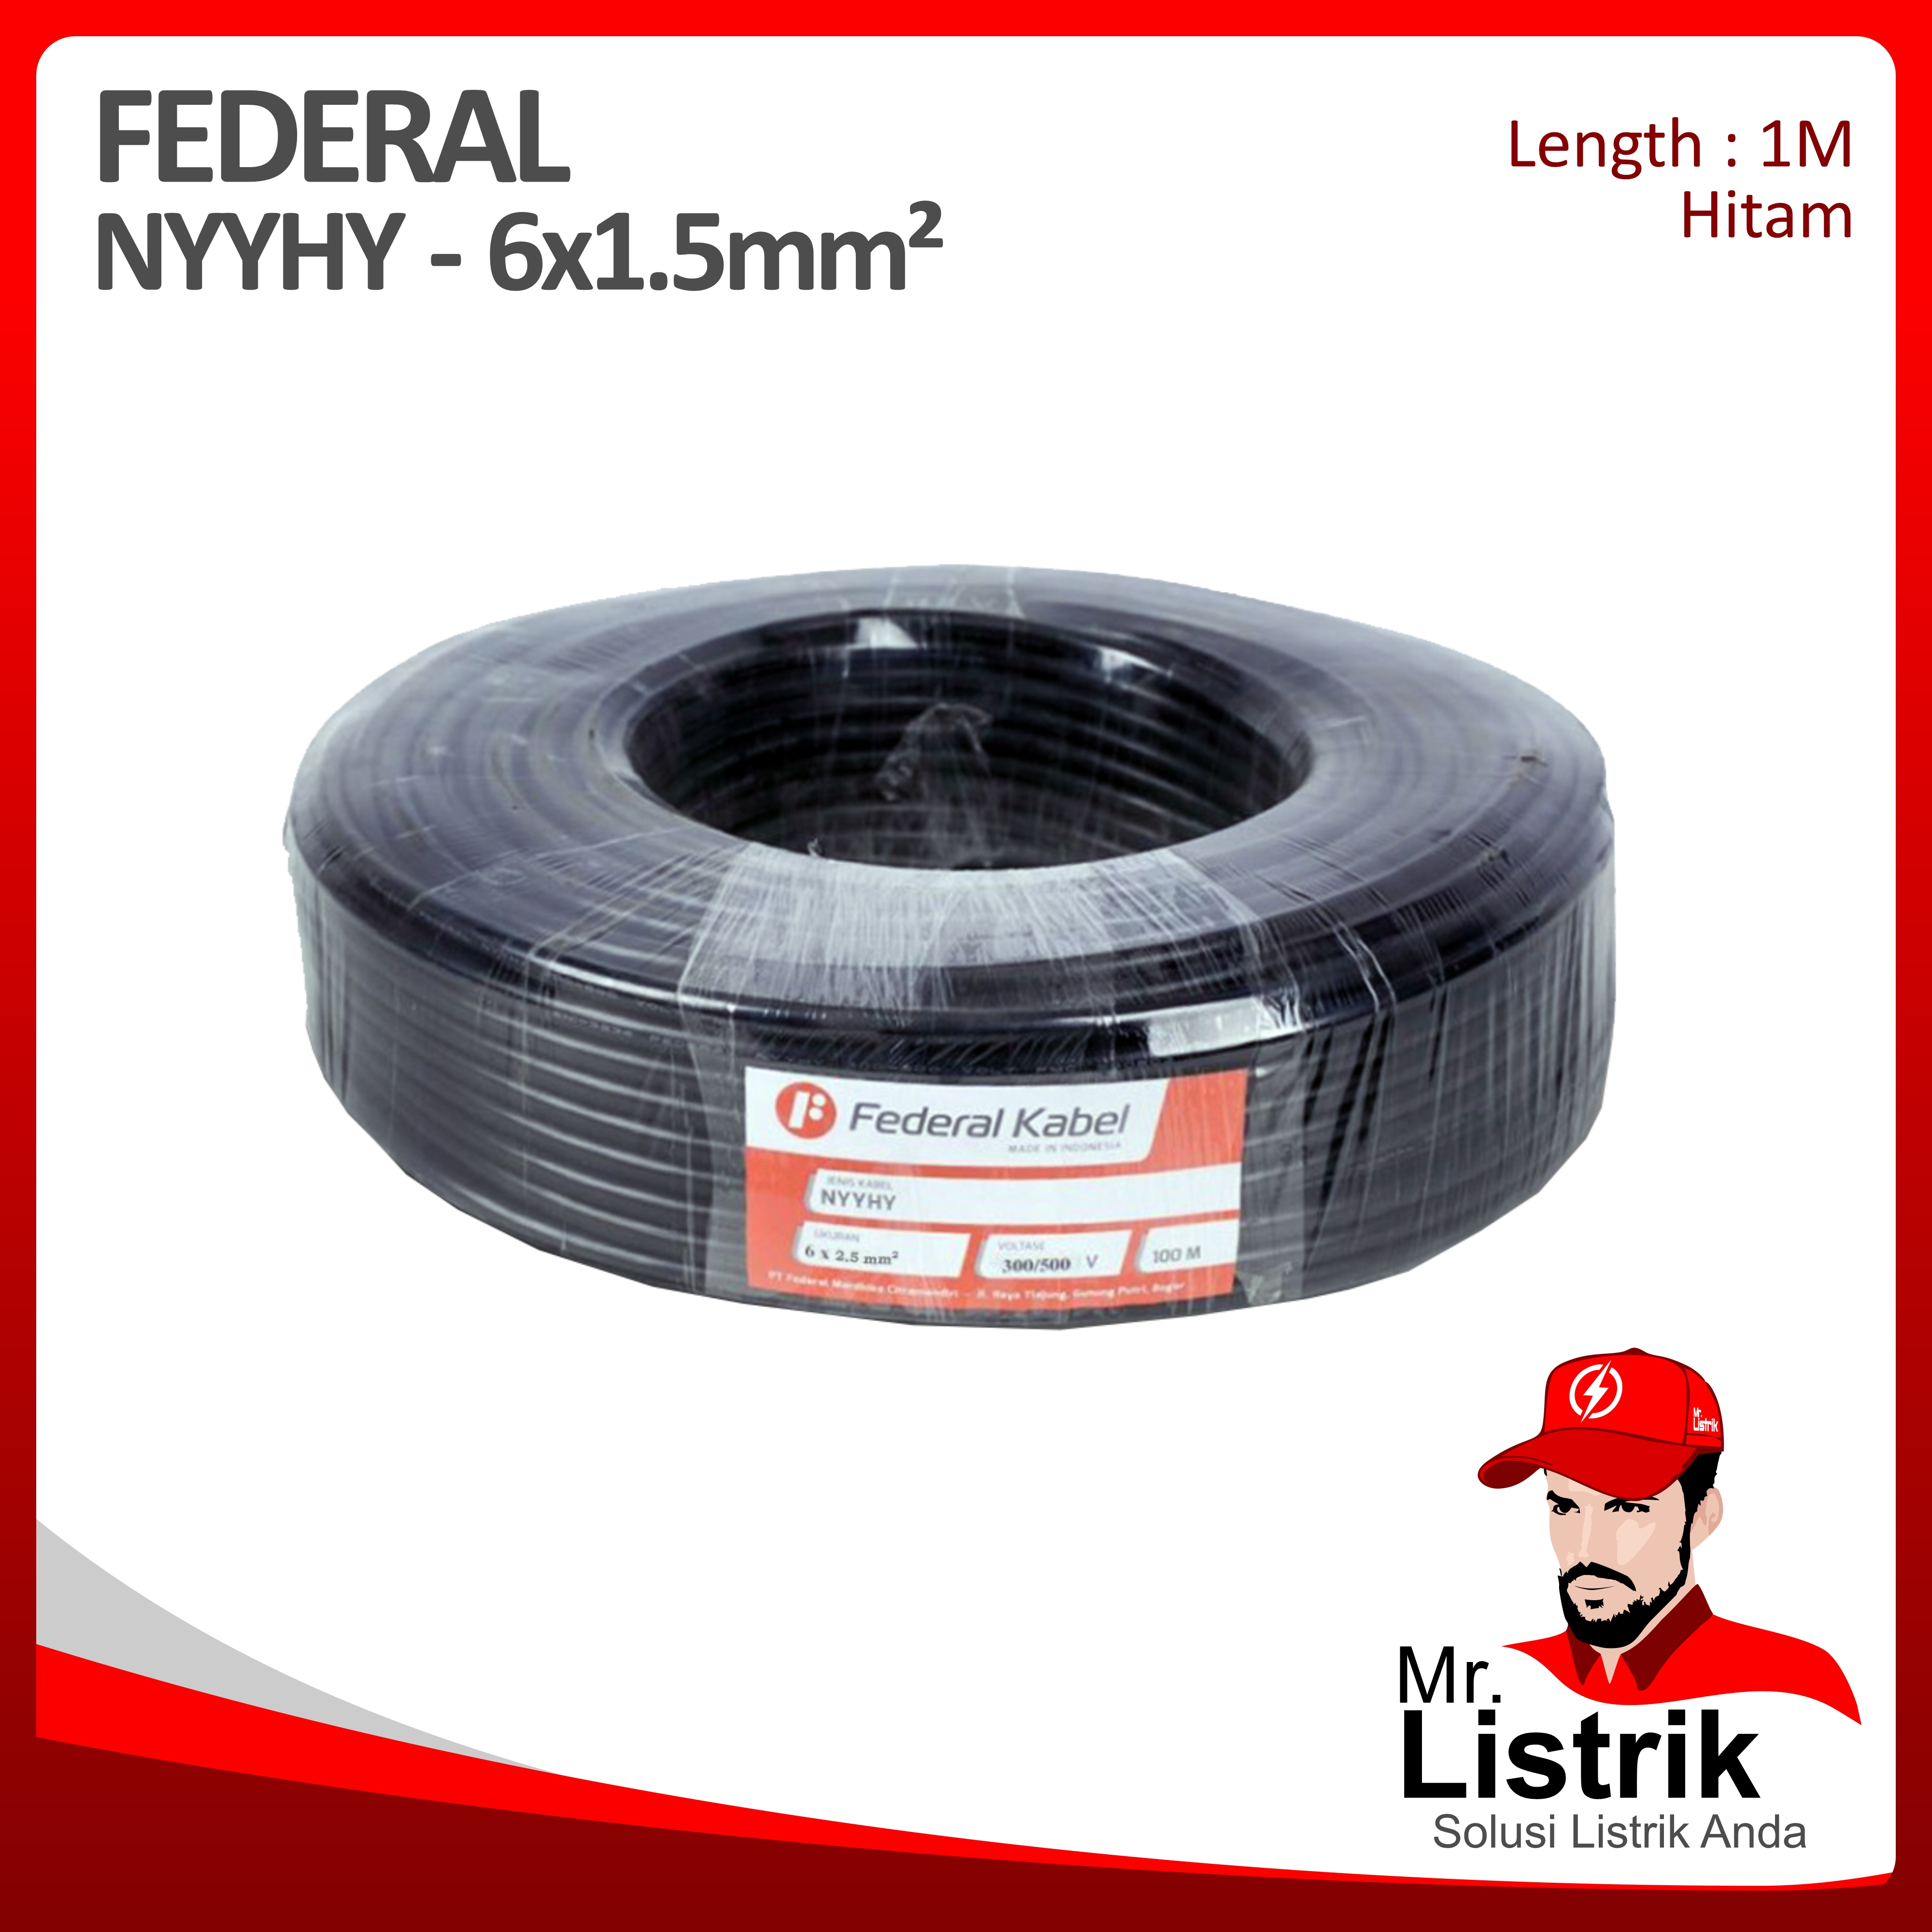 Kabel NYYHY Federal 6x1.5 mm² @1 Mtr